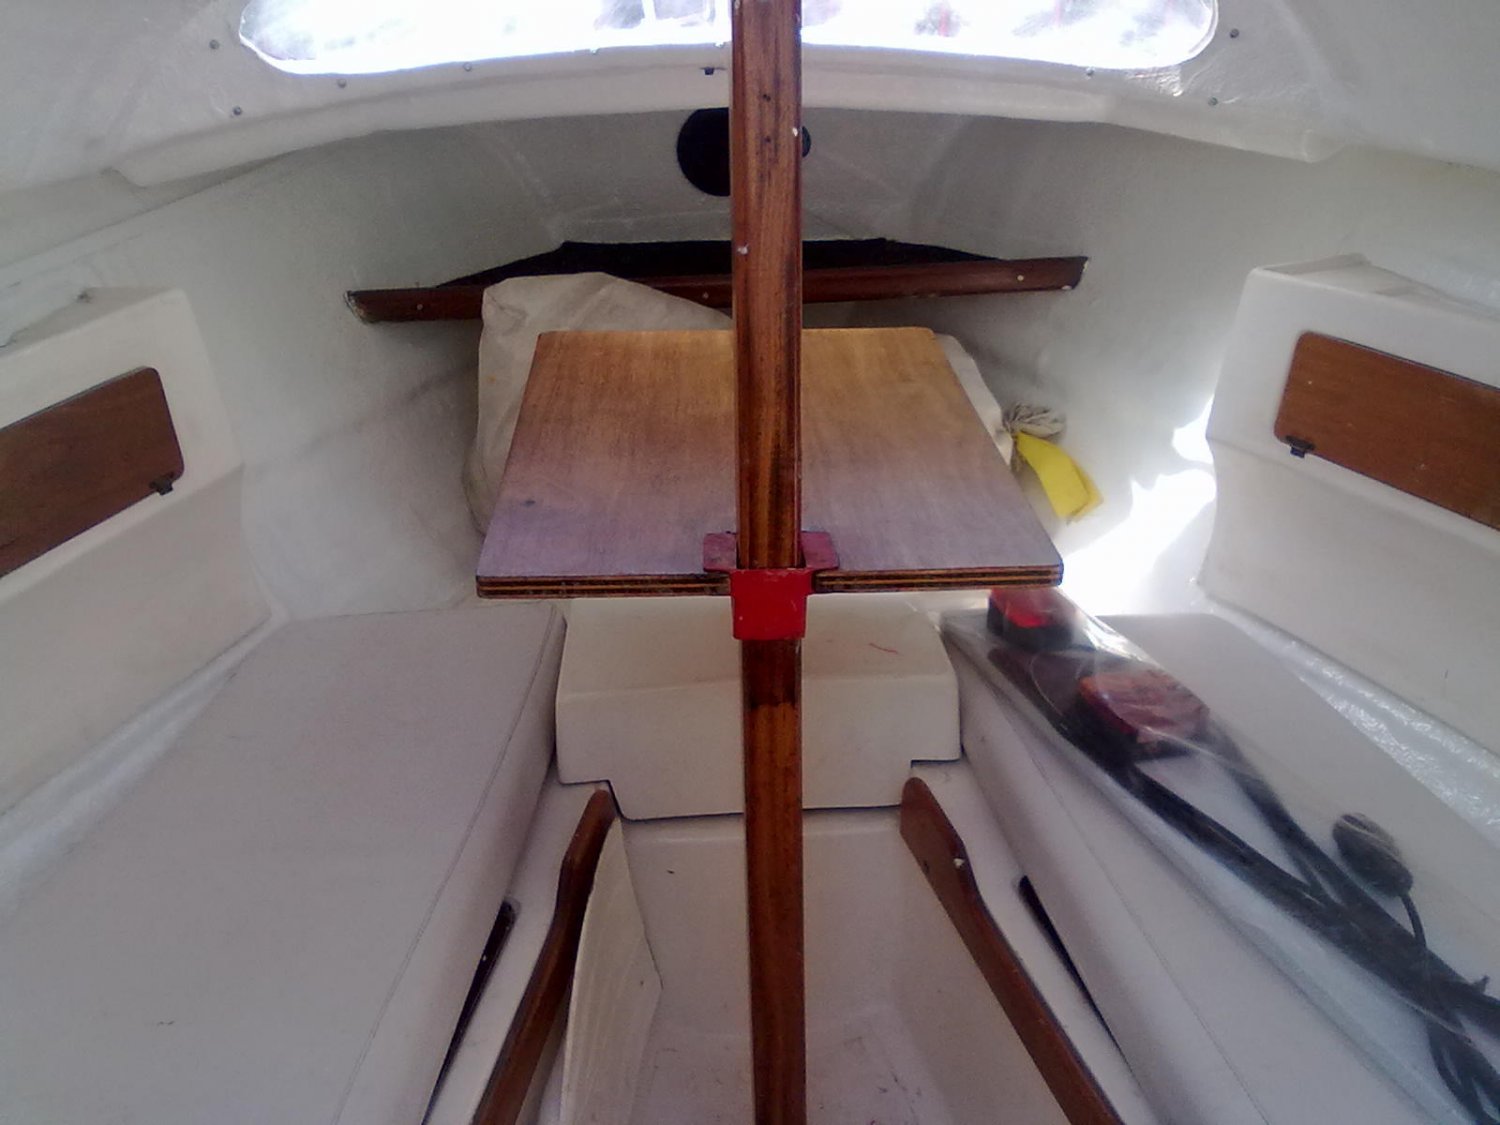 leisure 17 sailboat for sale